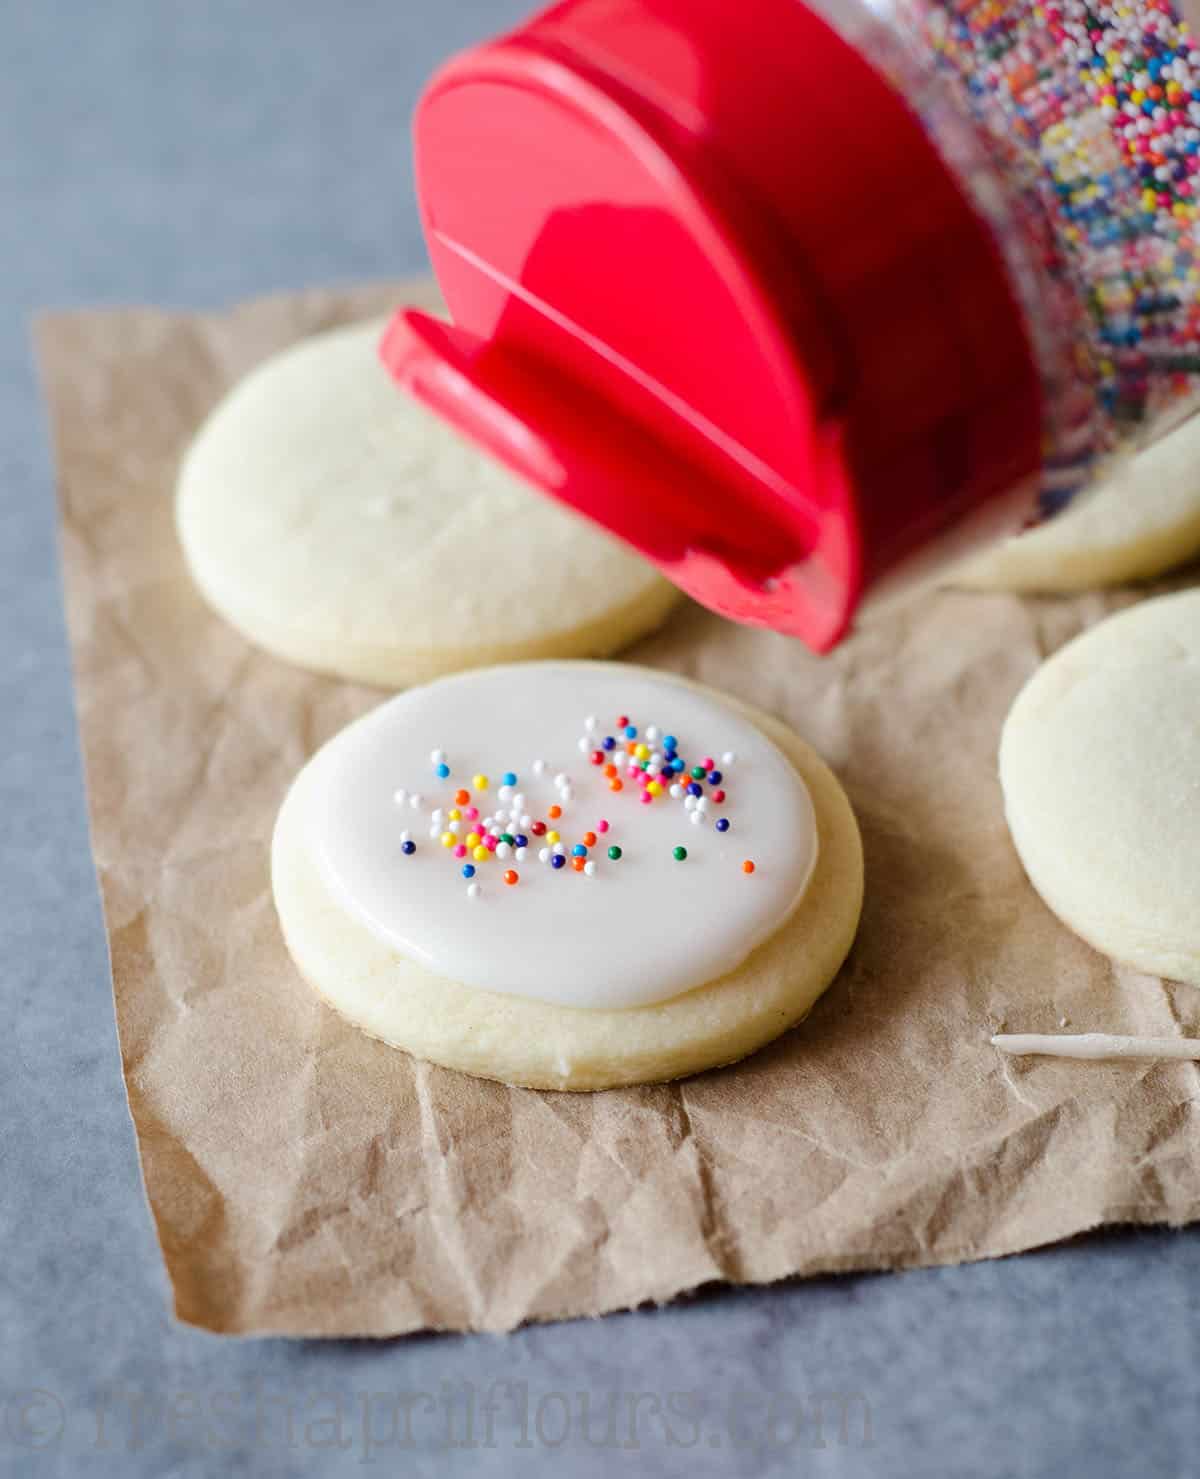 sprinkling non-pareils onto a cut-out sugar cookie with royal icing on it